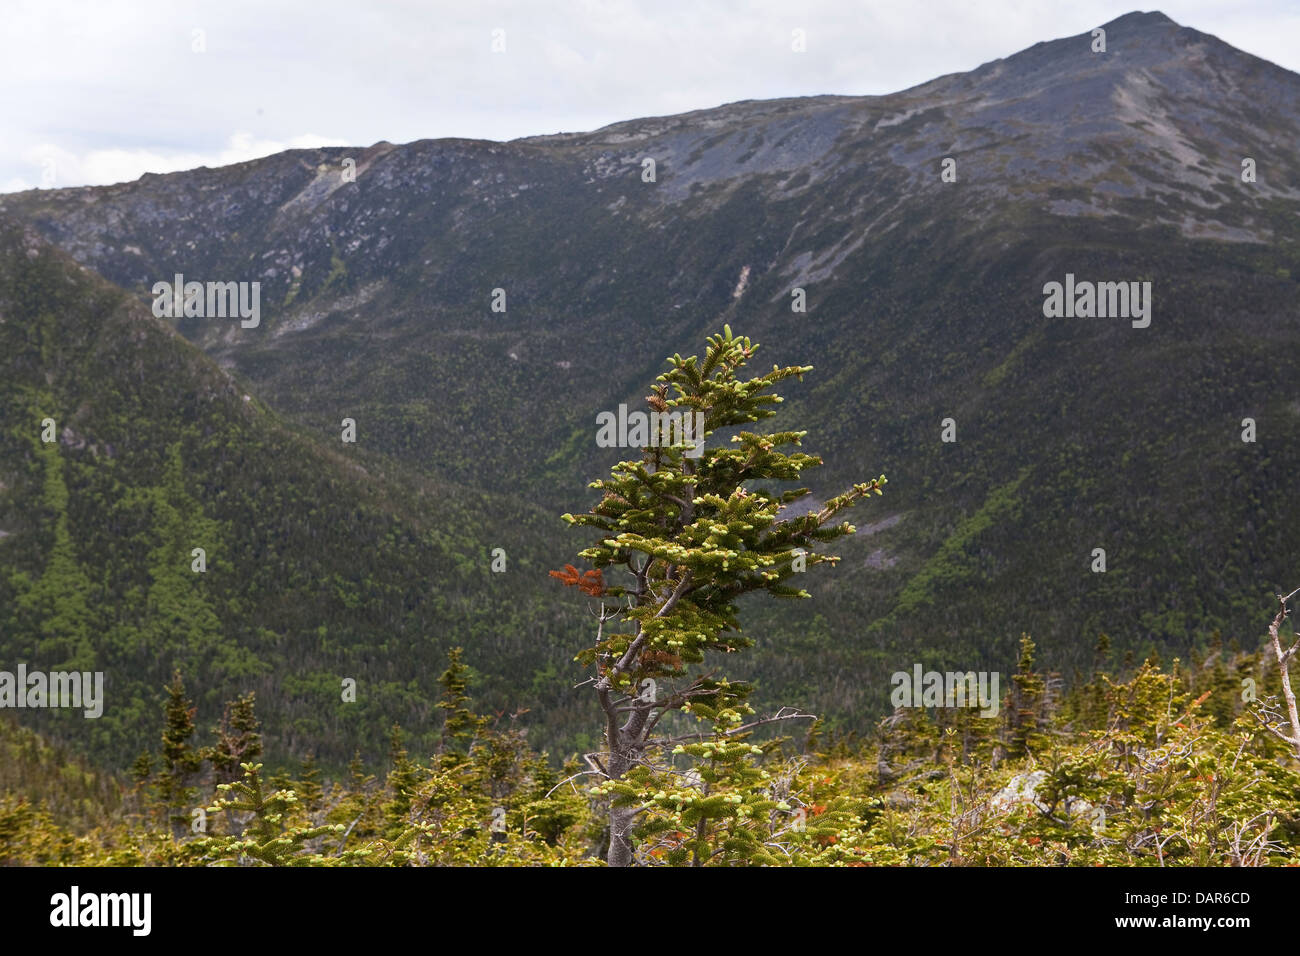 A fir tree is seen on the Mount Washington in New Hampshire Stock Photo